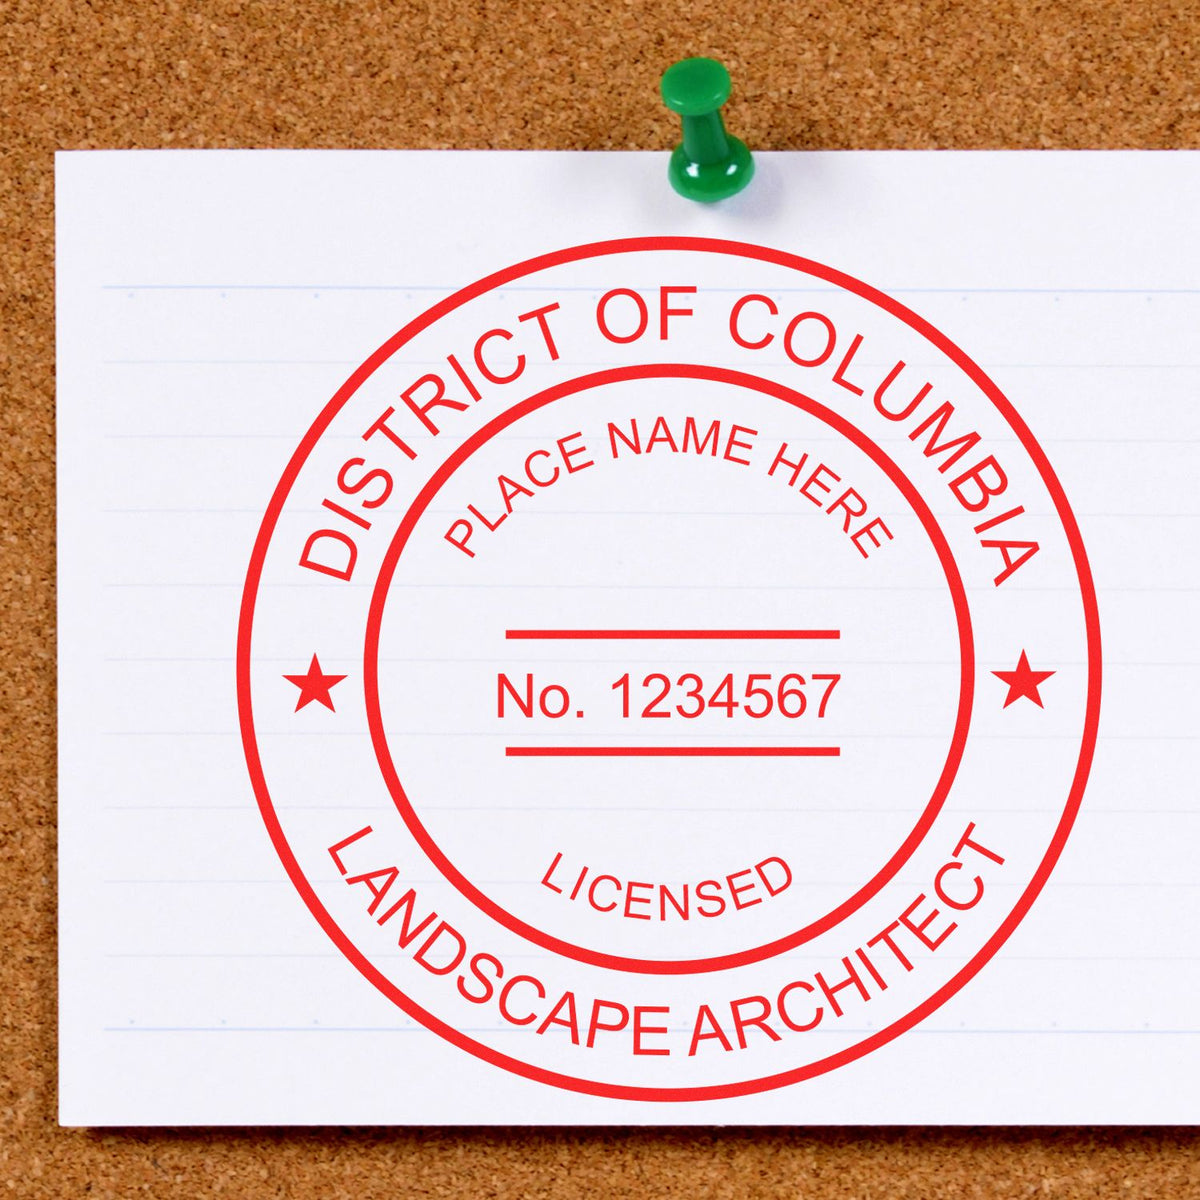 An alternative view of the Premium MaxLight Pre-Inked District of Columbia Landscape Architectural Stamp stamped on a sheet of paper showing the image in use